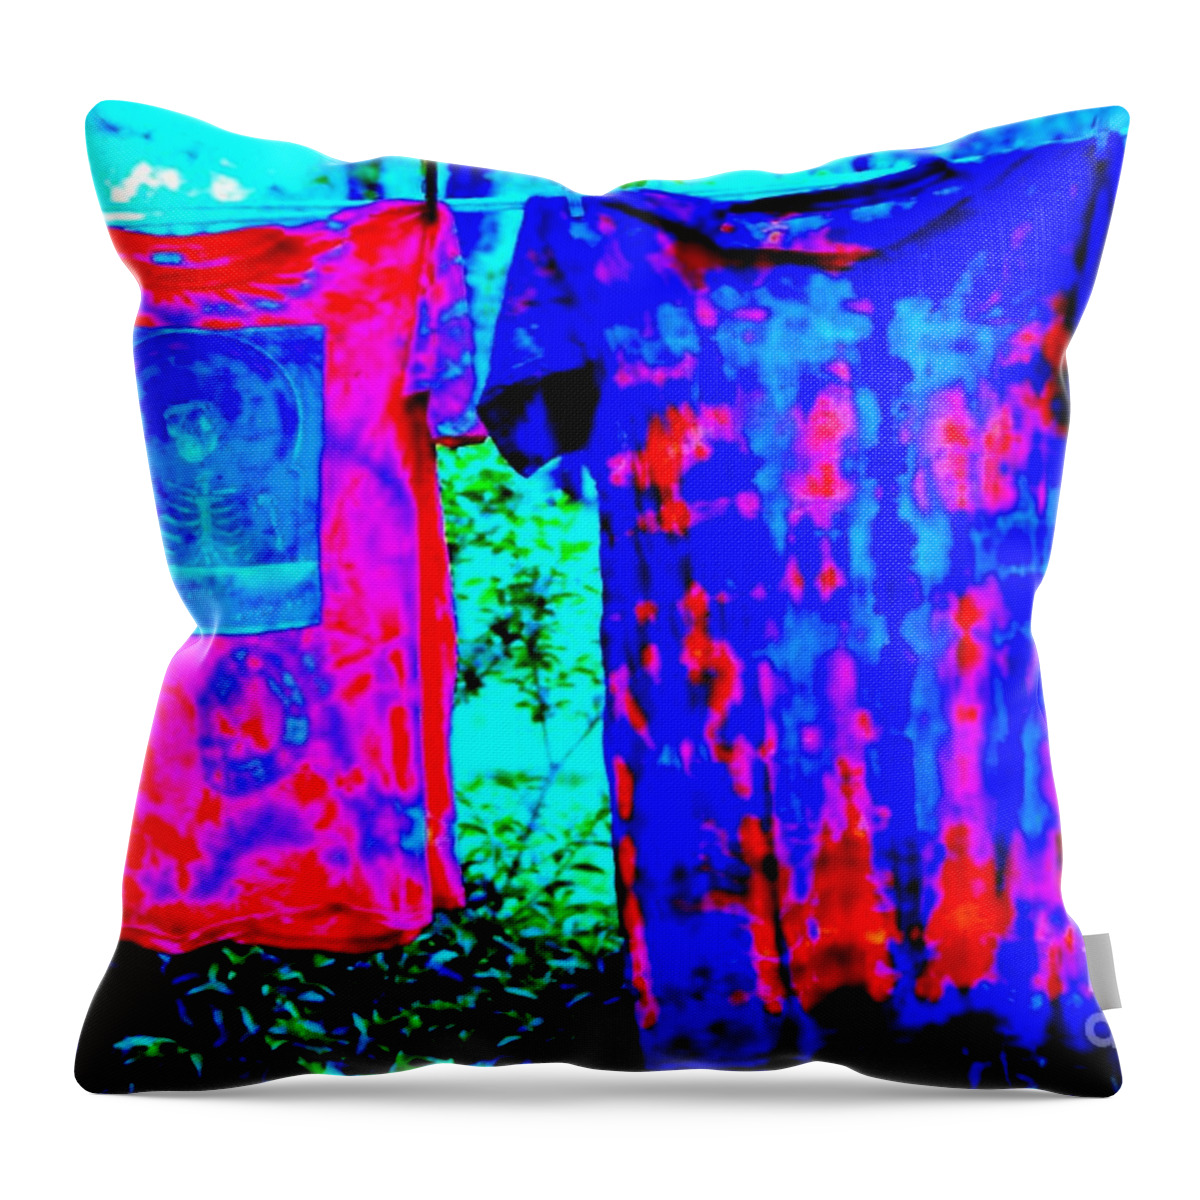 Tie Dye Throw Pillow featuring the photograph Not Fade Away - Tie Dye by Susan Carella